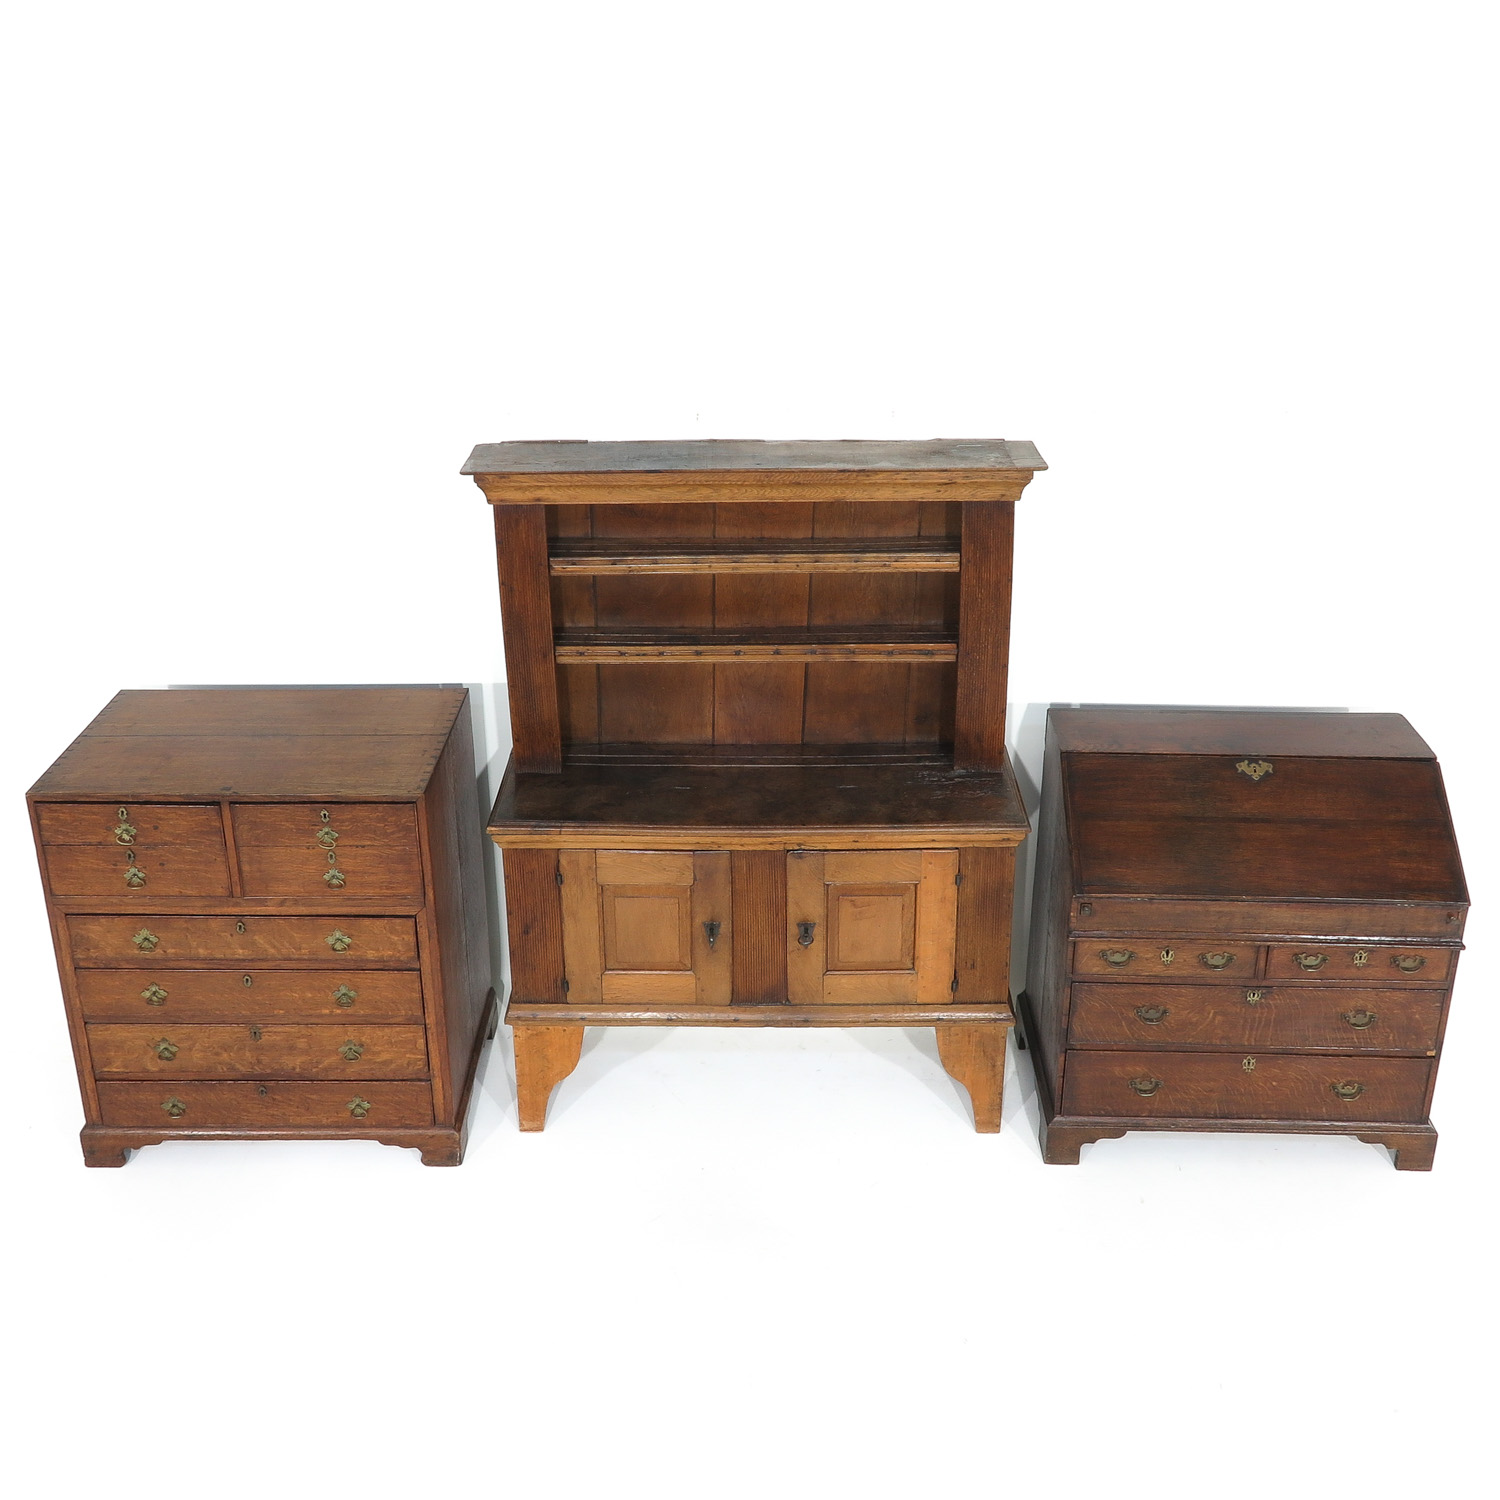 A Collection of Antique Oak Furniture - Image 4 of 10